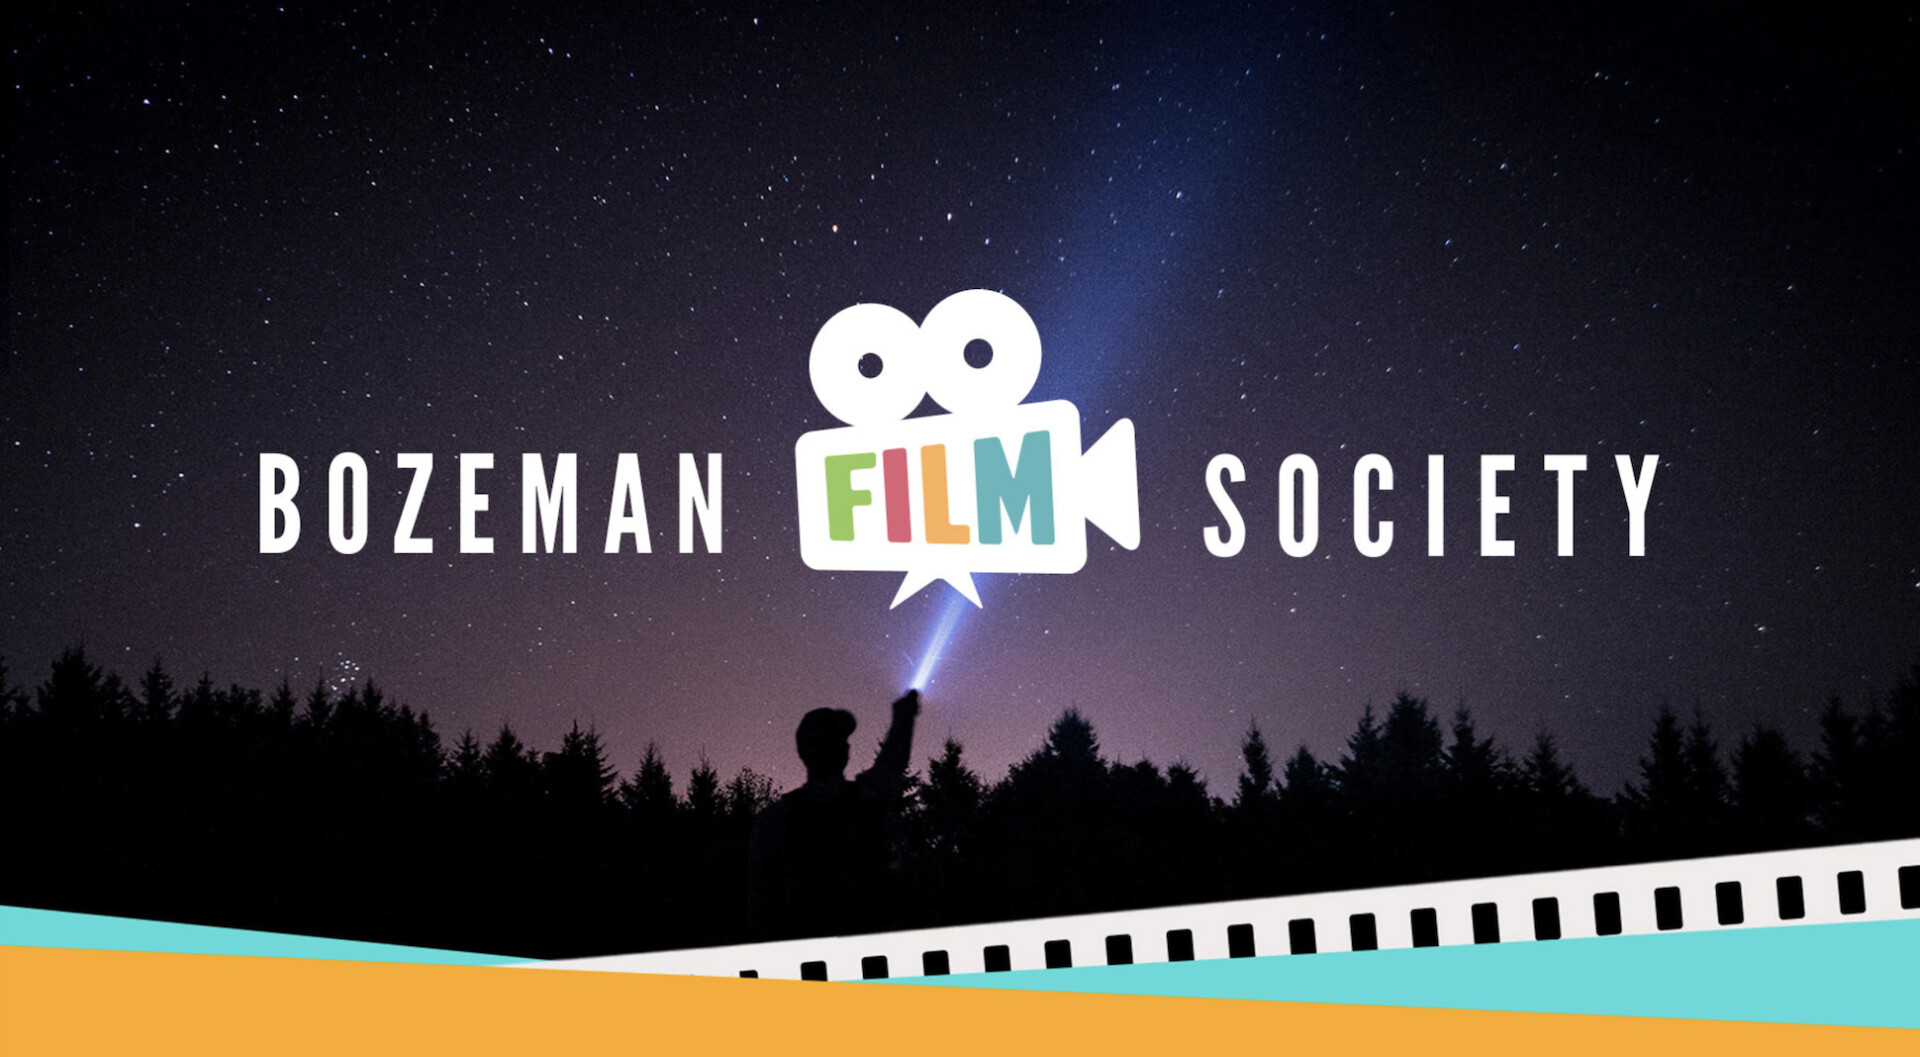 Bozeman Film Society: 40 Years of Independent Film